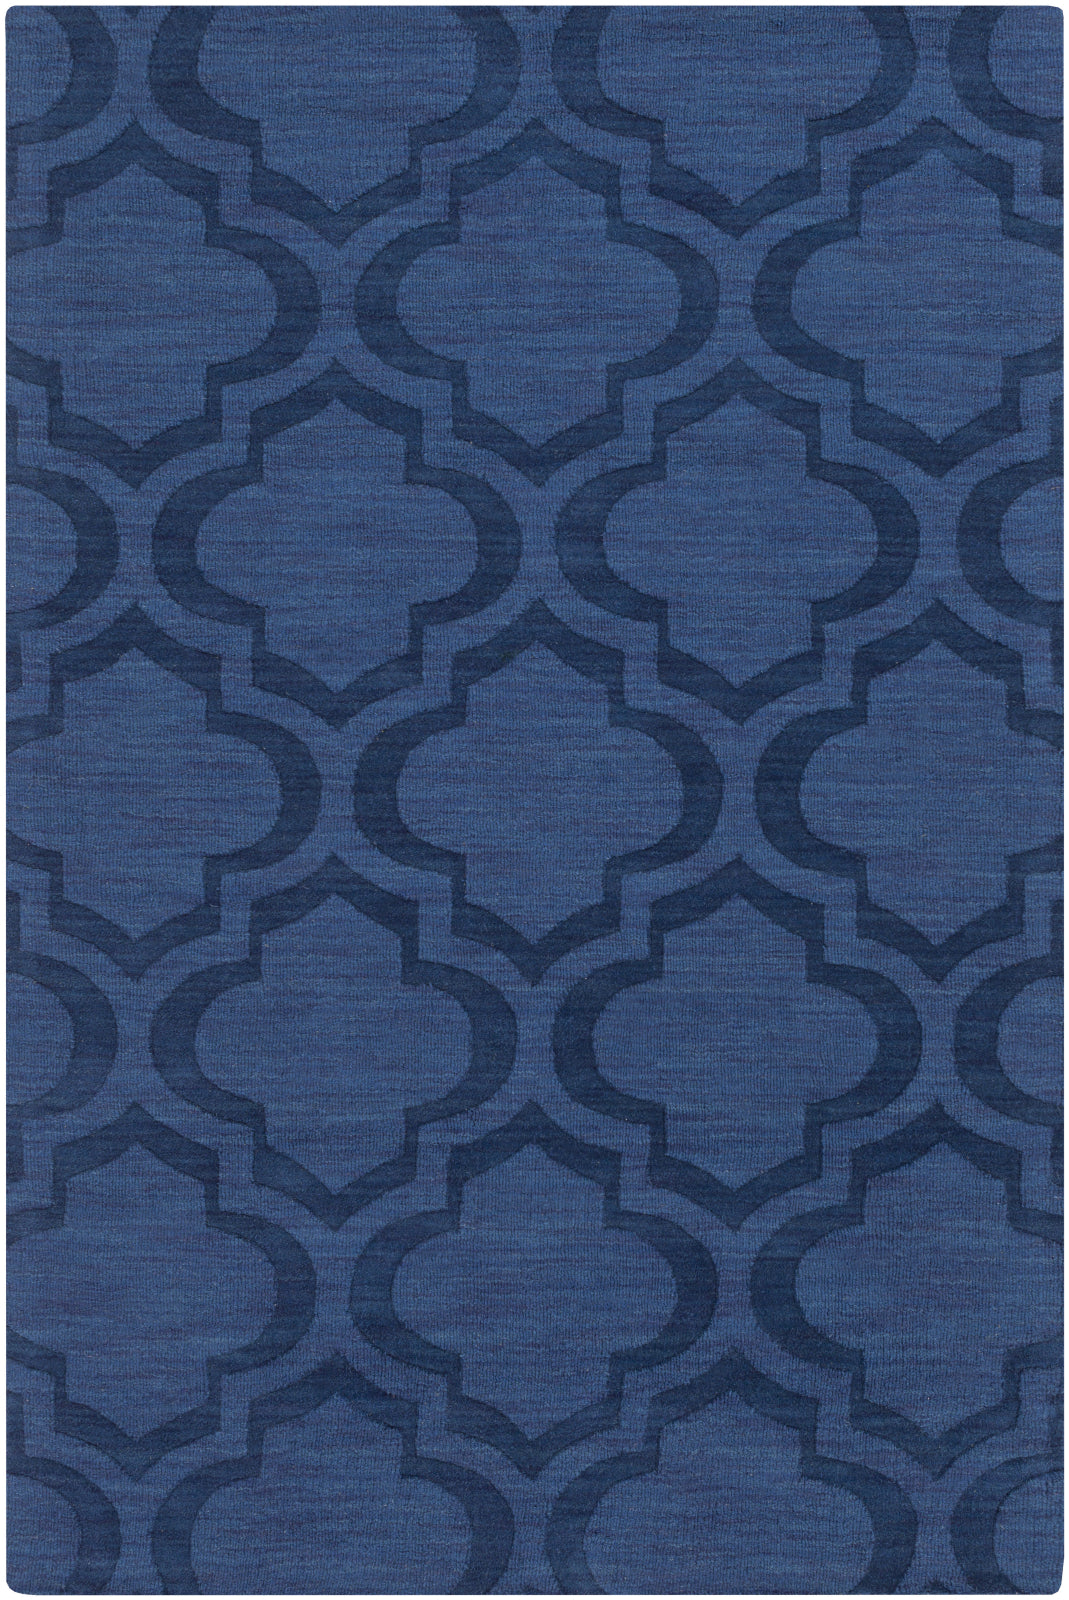 Artistic Weavers Central Park Kate AWHP4008 Area Rug main image